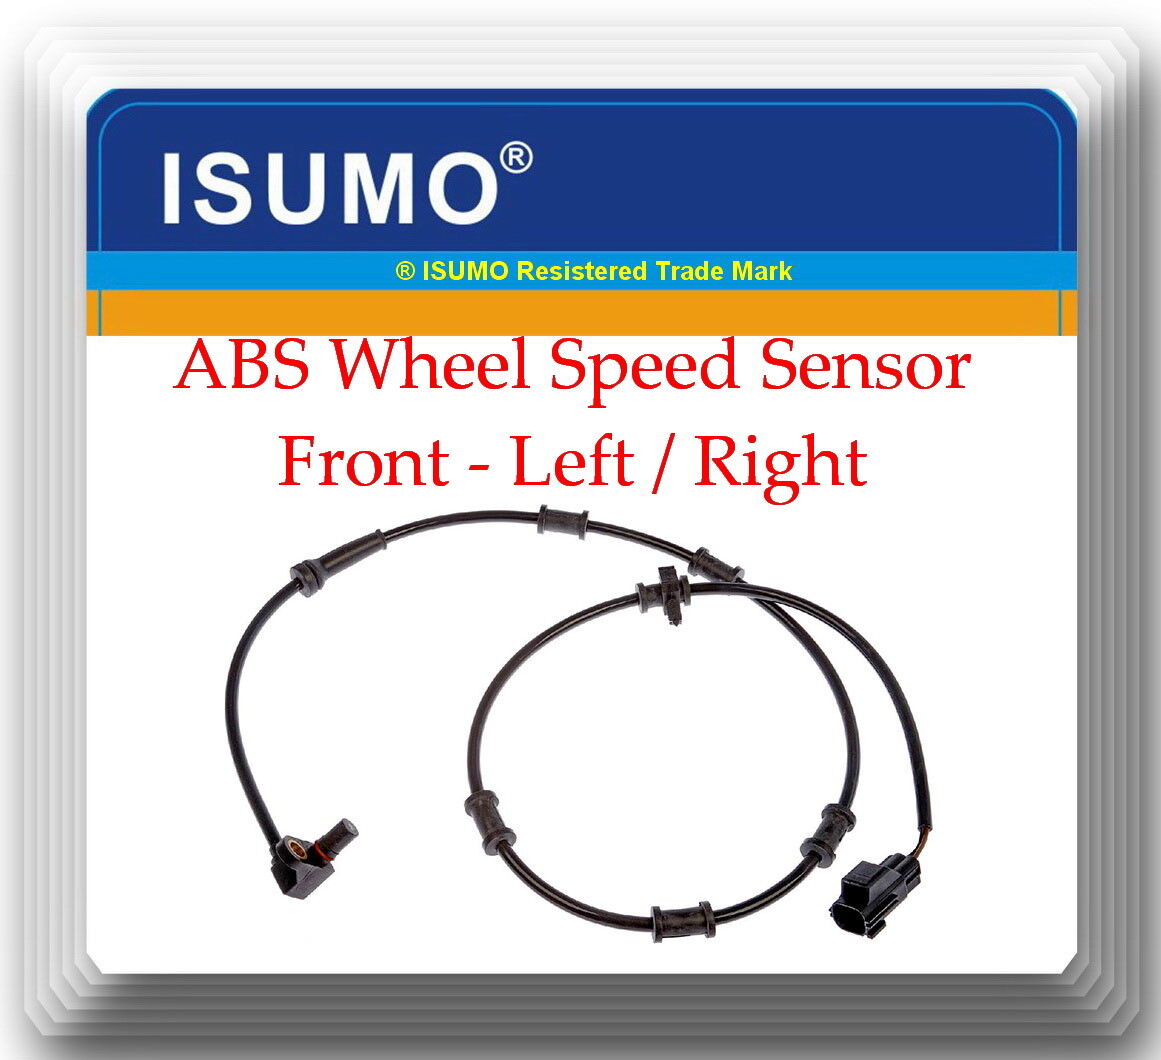 ABS Wheel Speed Sensor Front-Left/Right Fits:4WD Dodge Ram 2500 3500 2003-2005